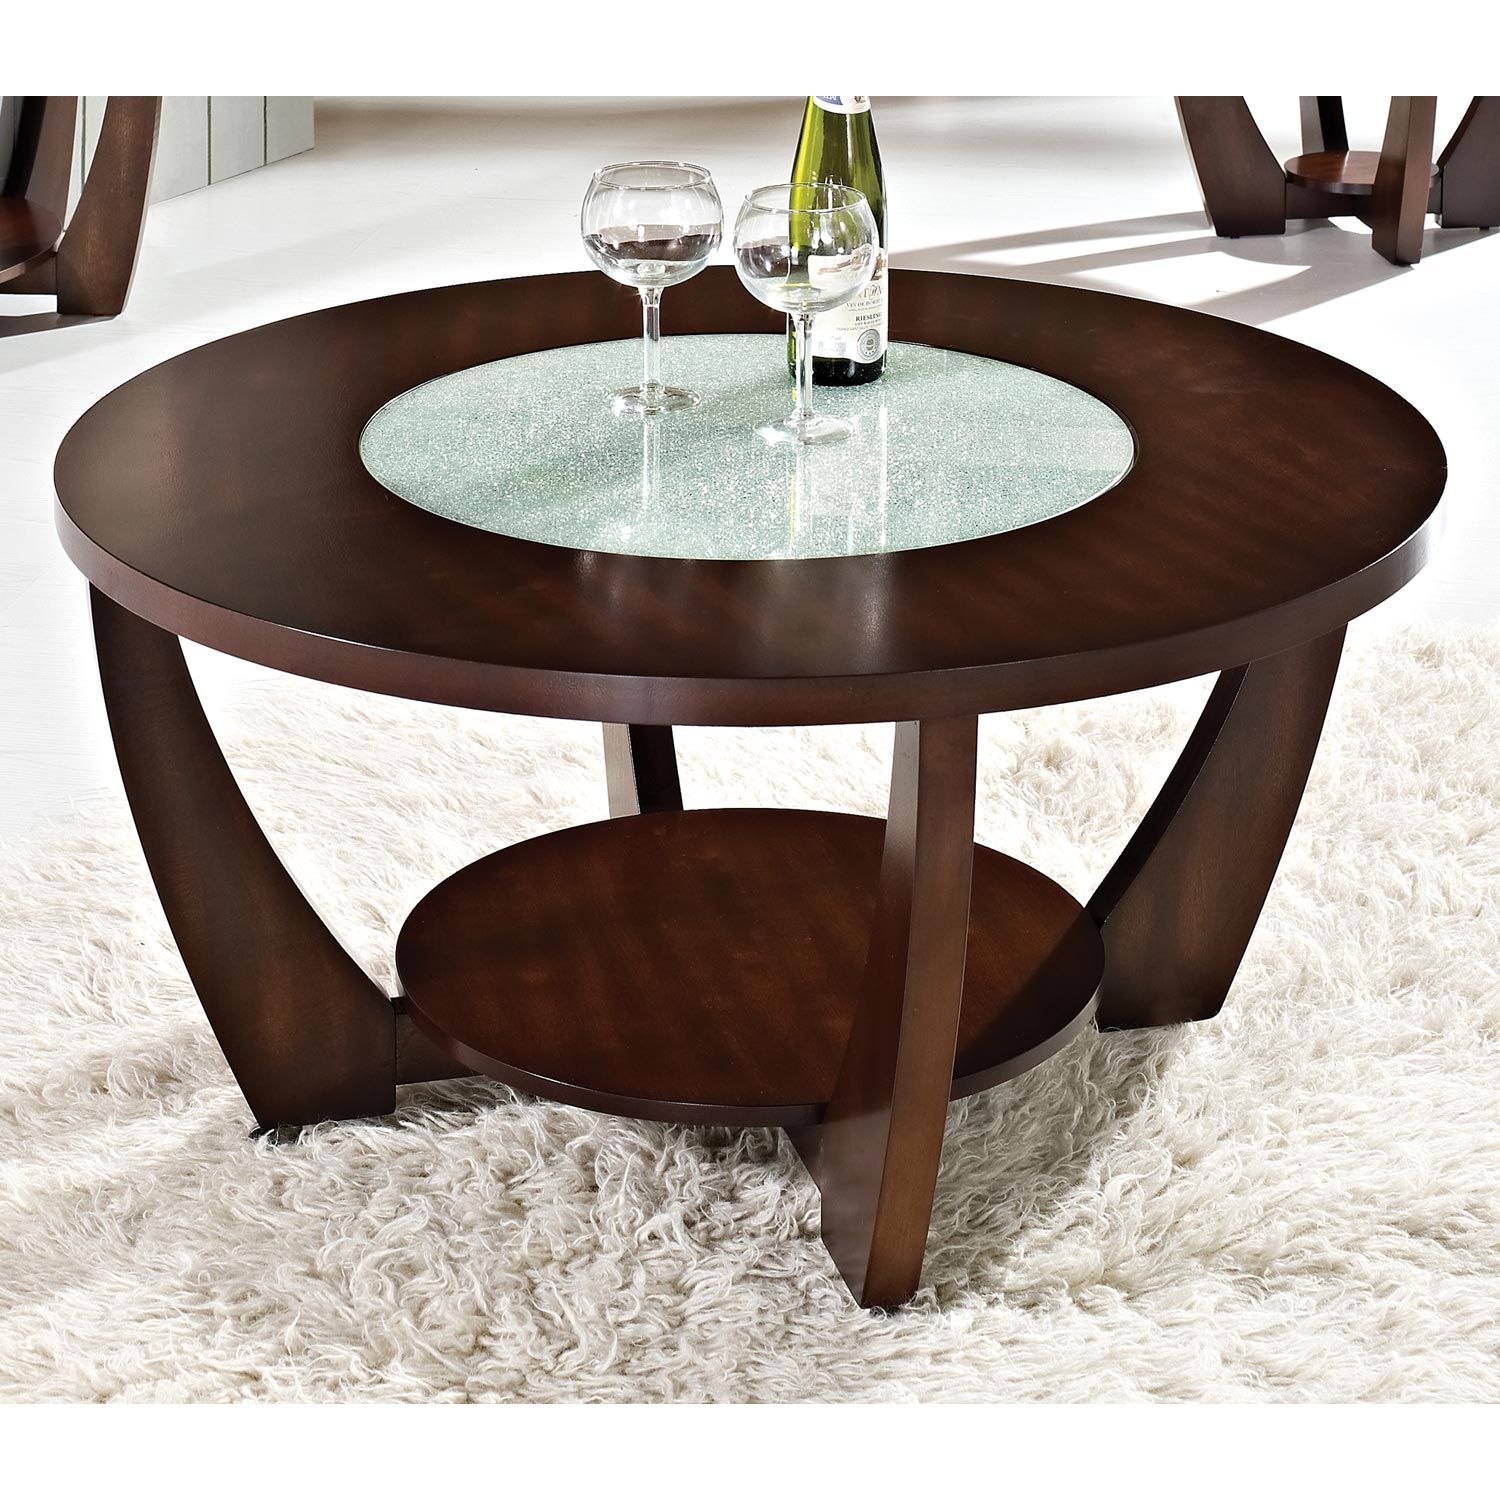 Rafael Round Coffee Table – Crackled Glass, Dark Cherry Wood | Dcg Stores Within Round Coffee Tables (Photo 10 of 15)